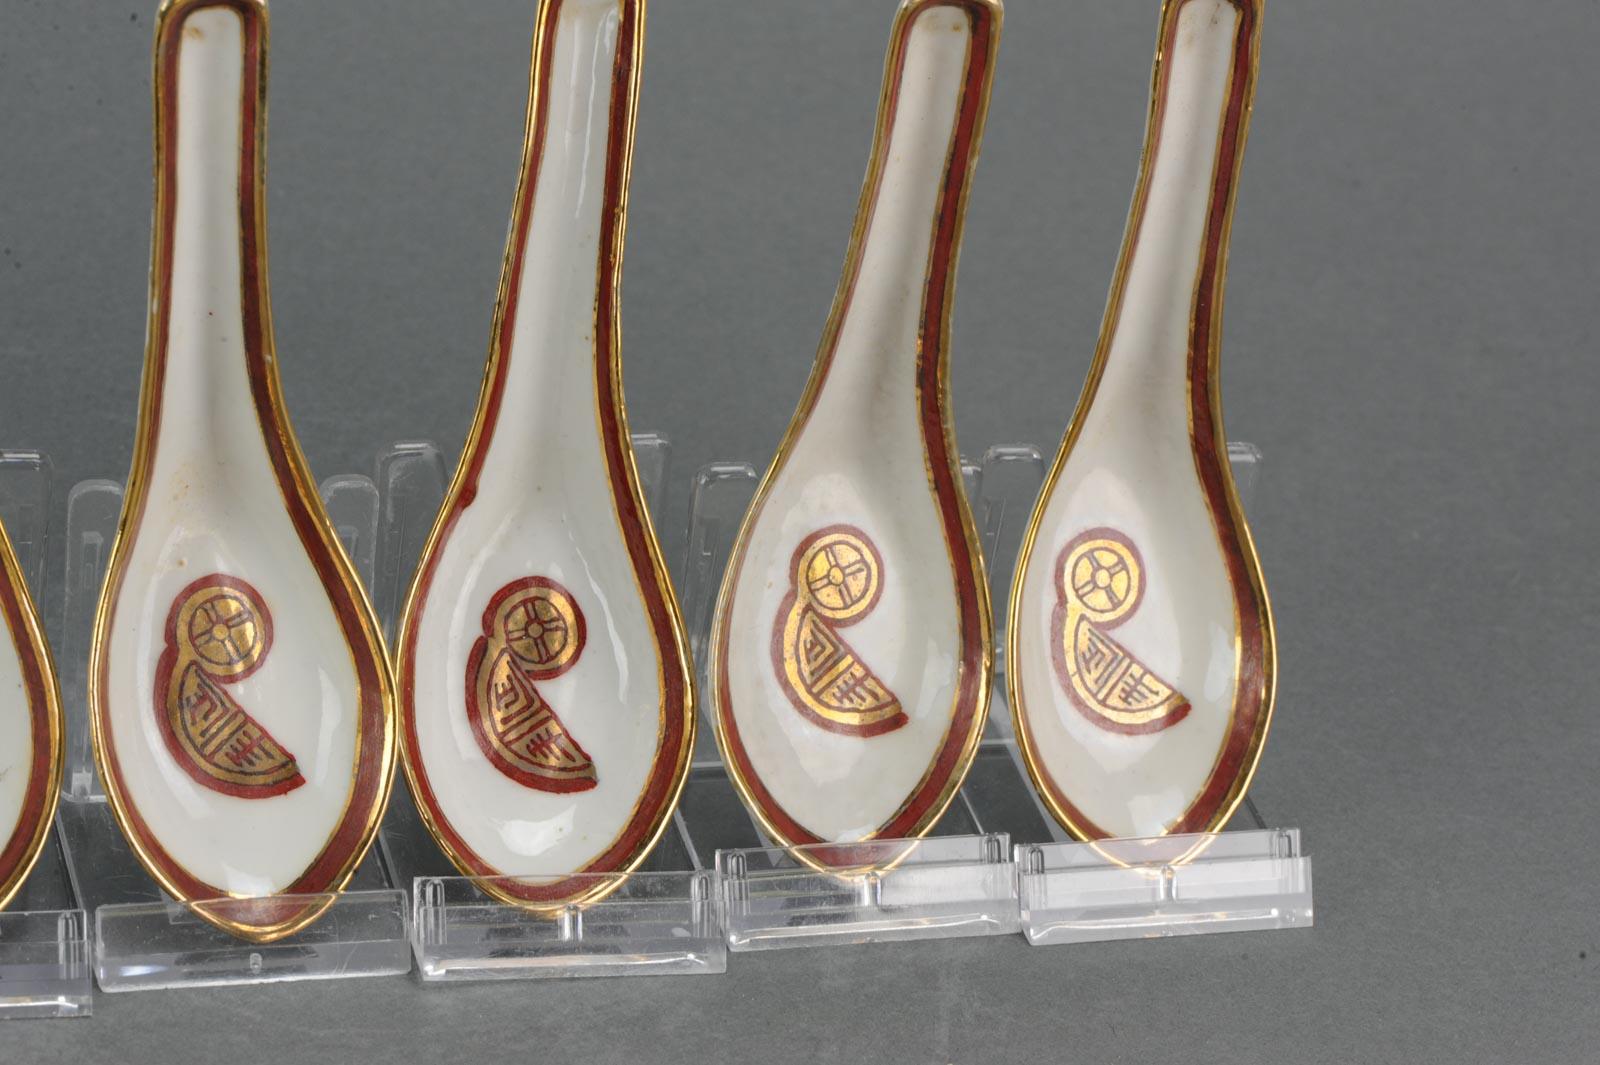 Set of 10 Chinese Porcelain Spoons South East Asian Market, Mid 20th Century For Sale 1